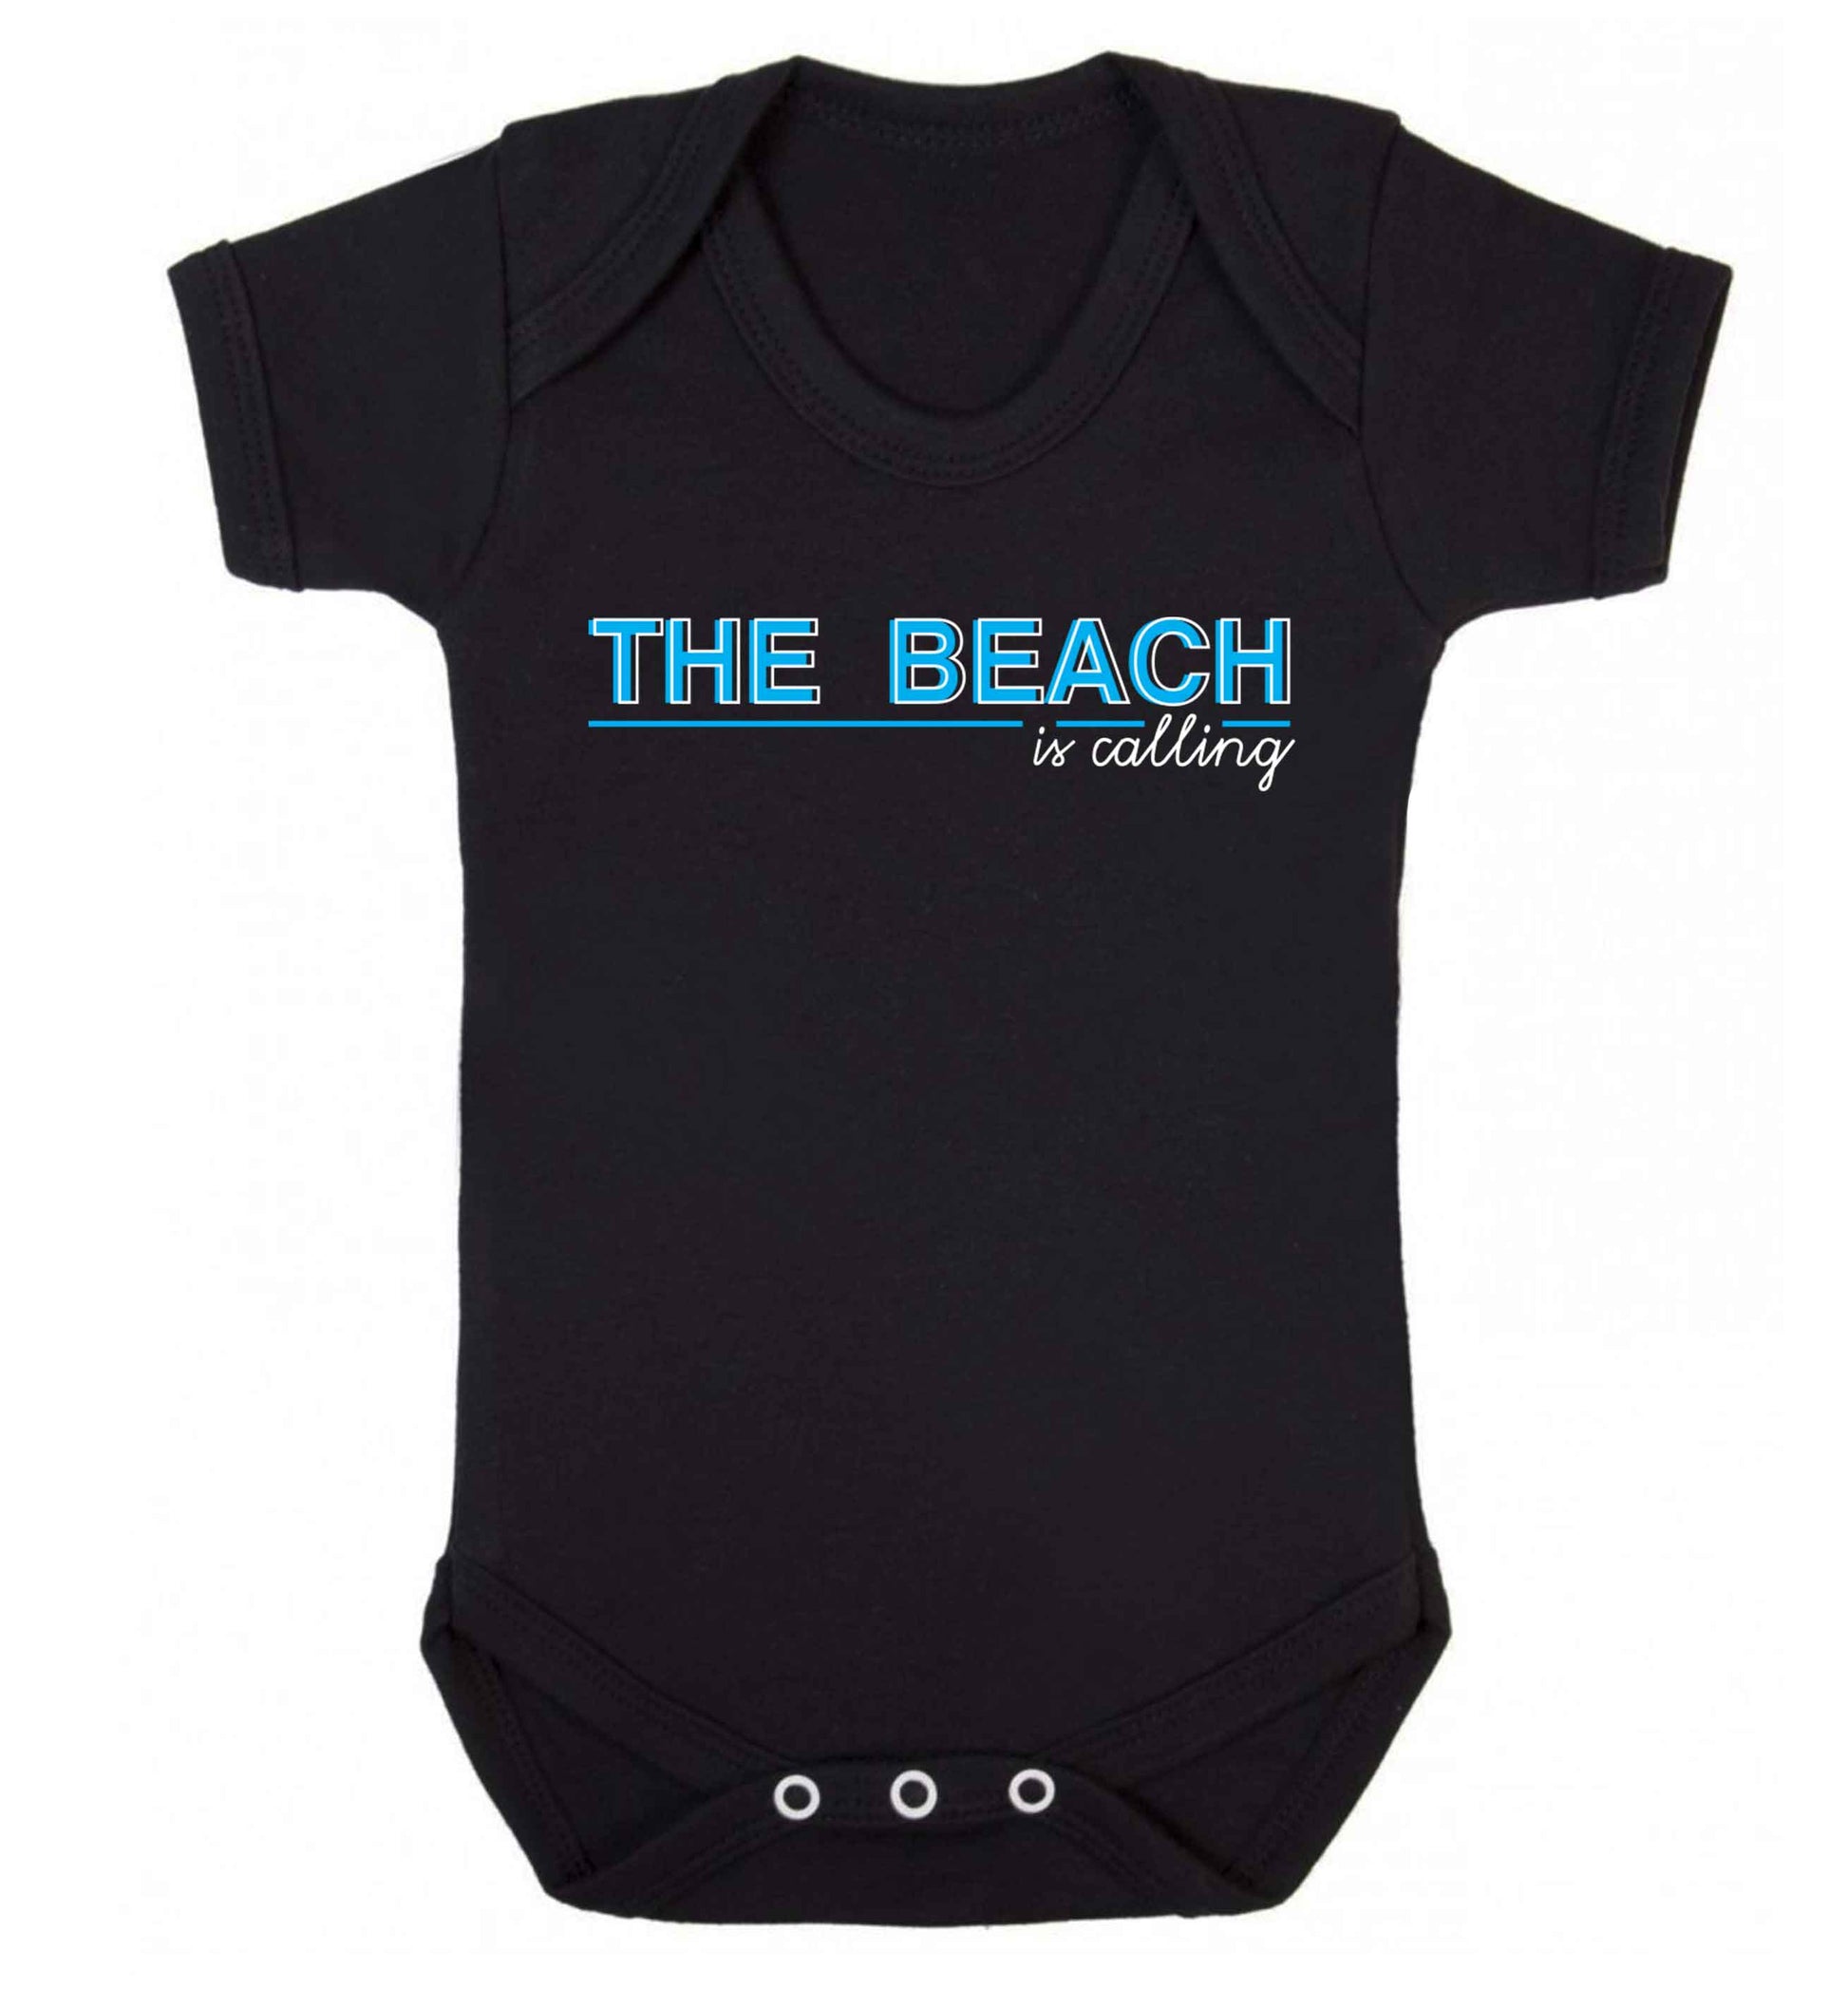 The beach is calling Baby Vest black 18-24 months